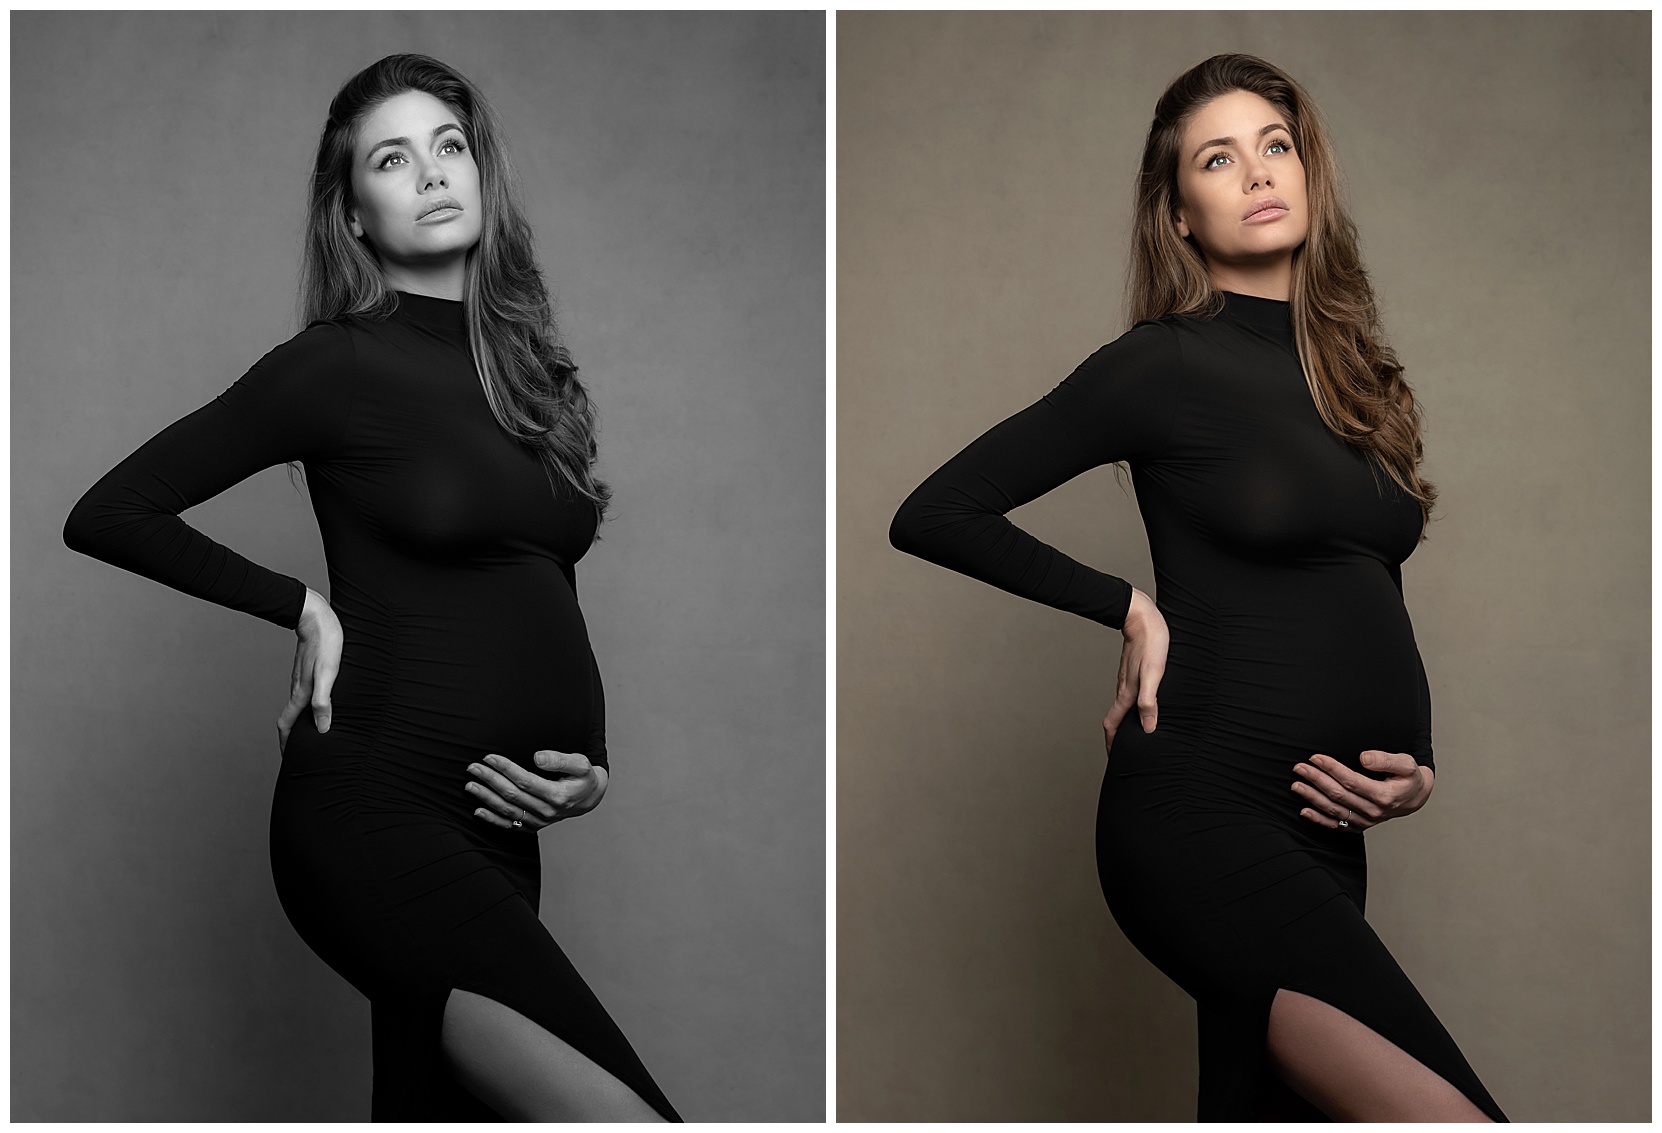 Photo montage containing two portraits of a white, pregnant model wearing a black mock turtleneck. The left portrait is in black and white and the right portrait is in color. 